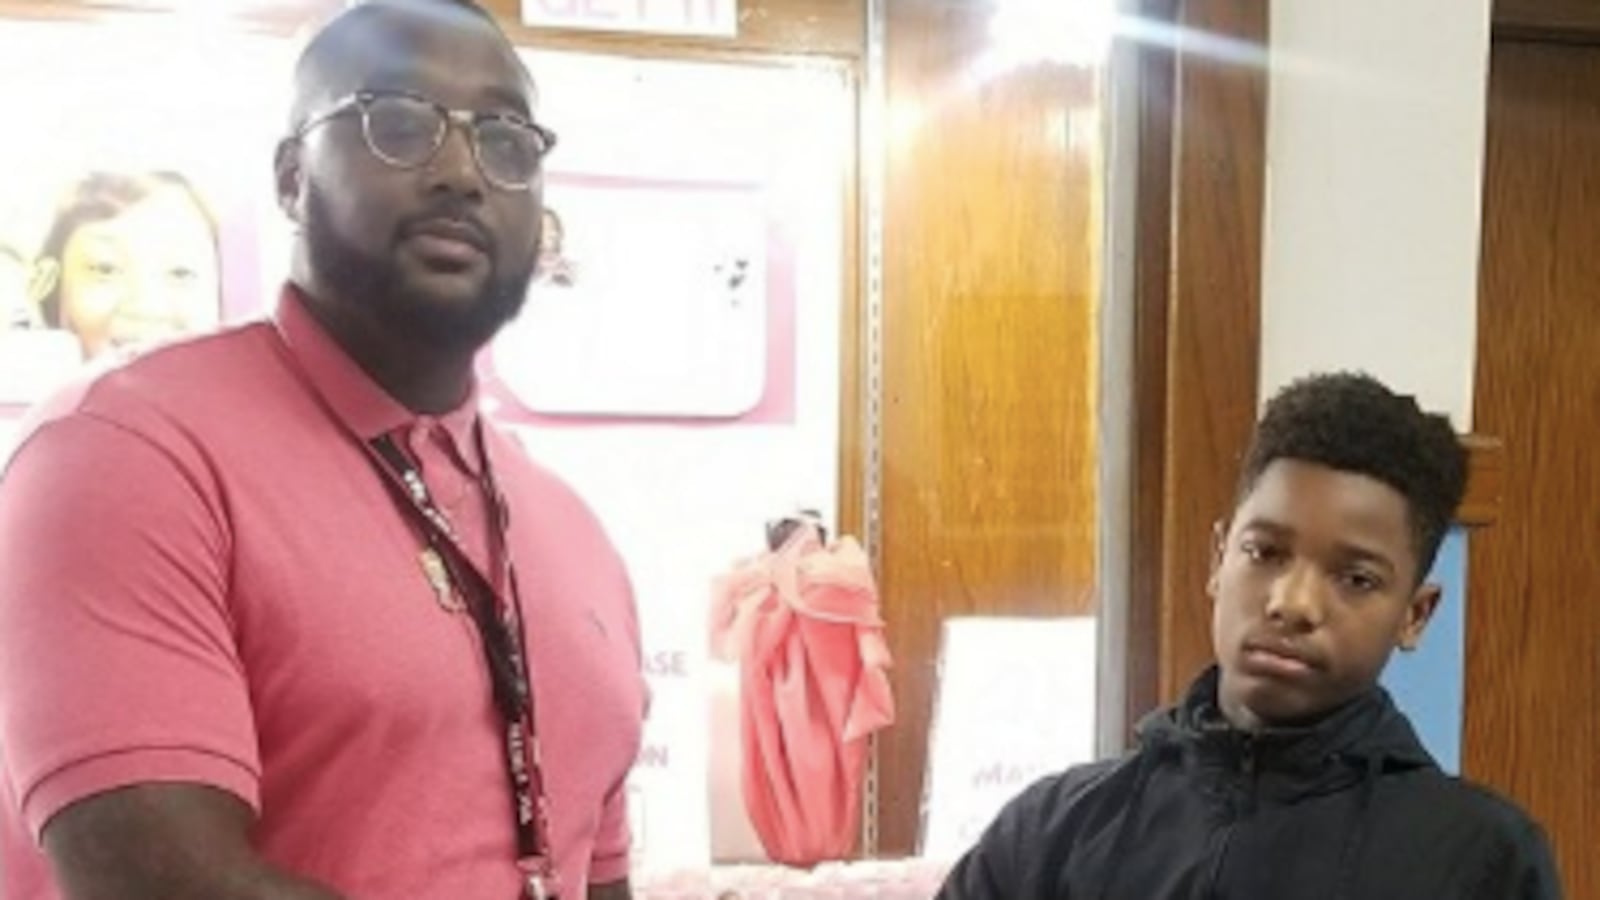 Thomas Fields (left), Paul Robeson Malcolm X Academy’s school culture facilitator, with a student. He passed away Monday due to coronavirus complications. Photo courtesy of Jeffery Robinson/Paul Robeson Malcolm X Academy